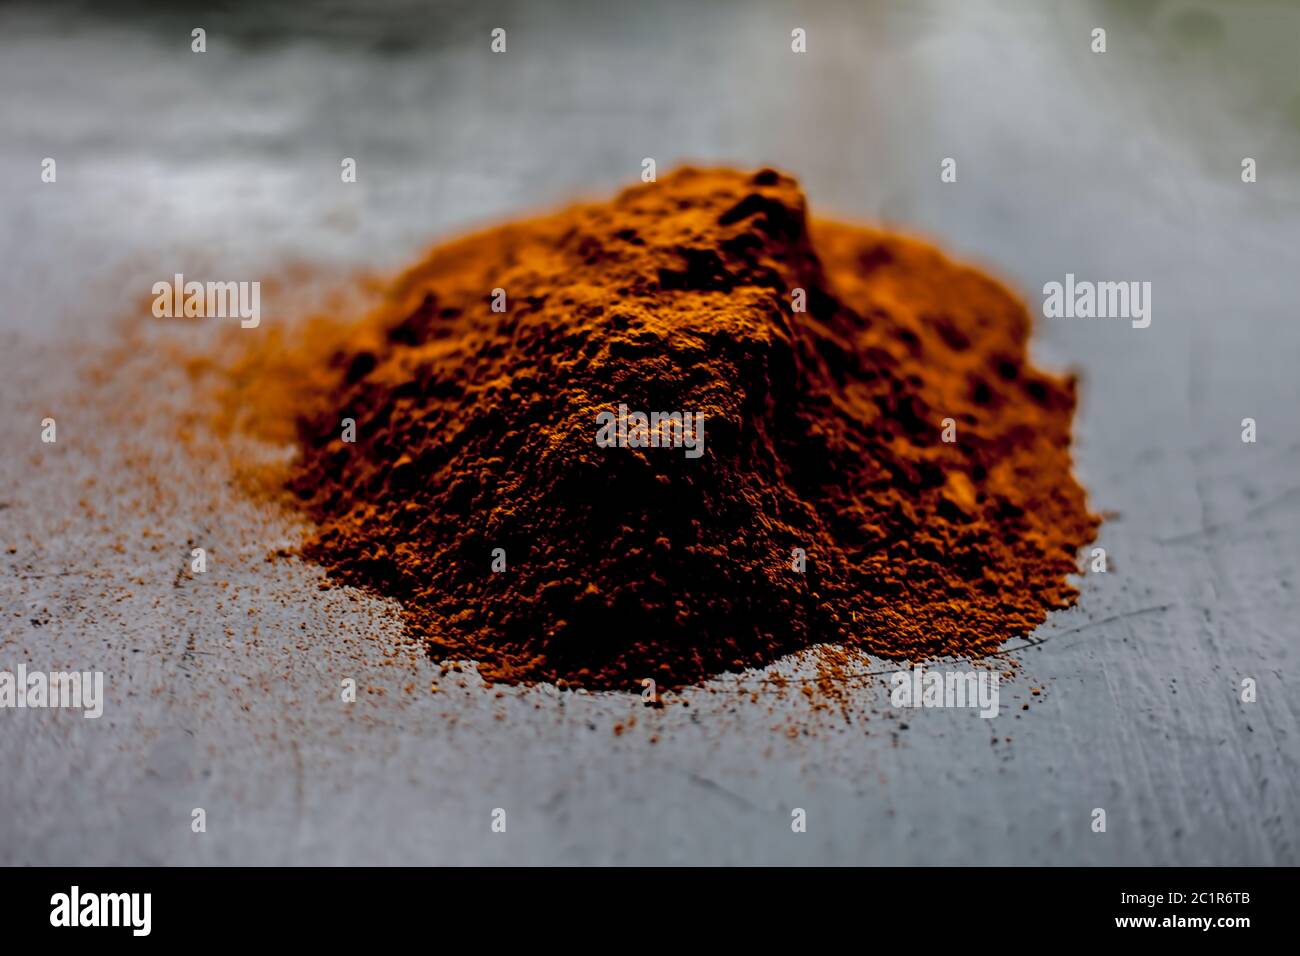 Shot of raw revand chini powder on a wooden surface. Shot in dark gothic colors. Stock Photo